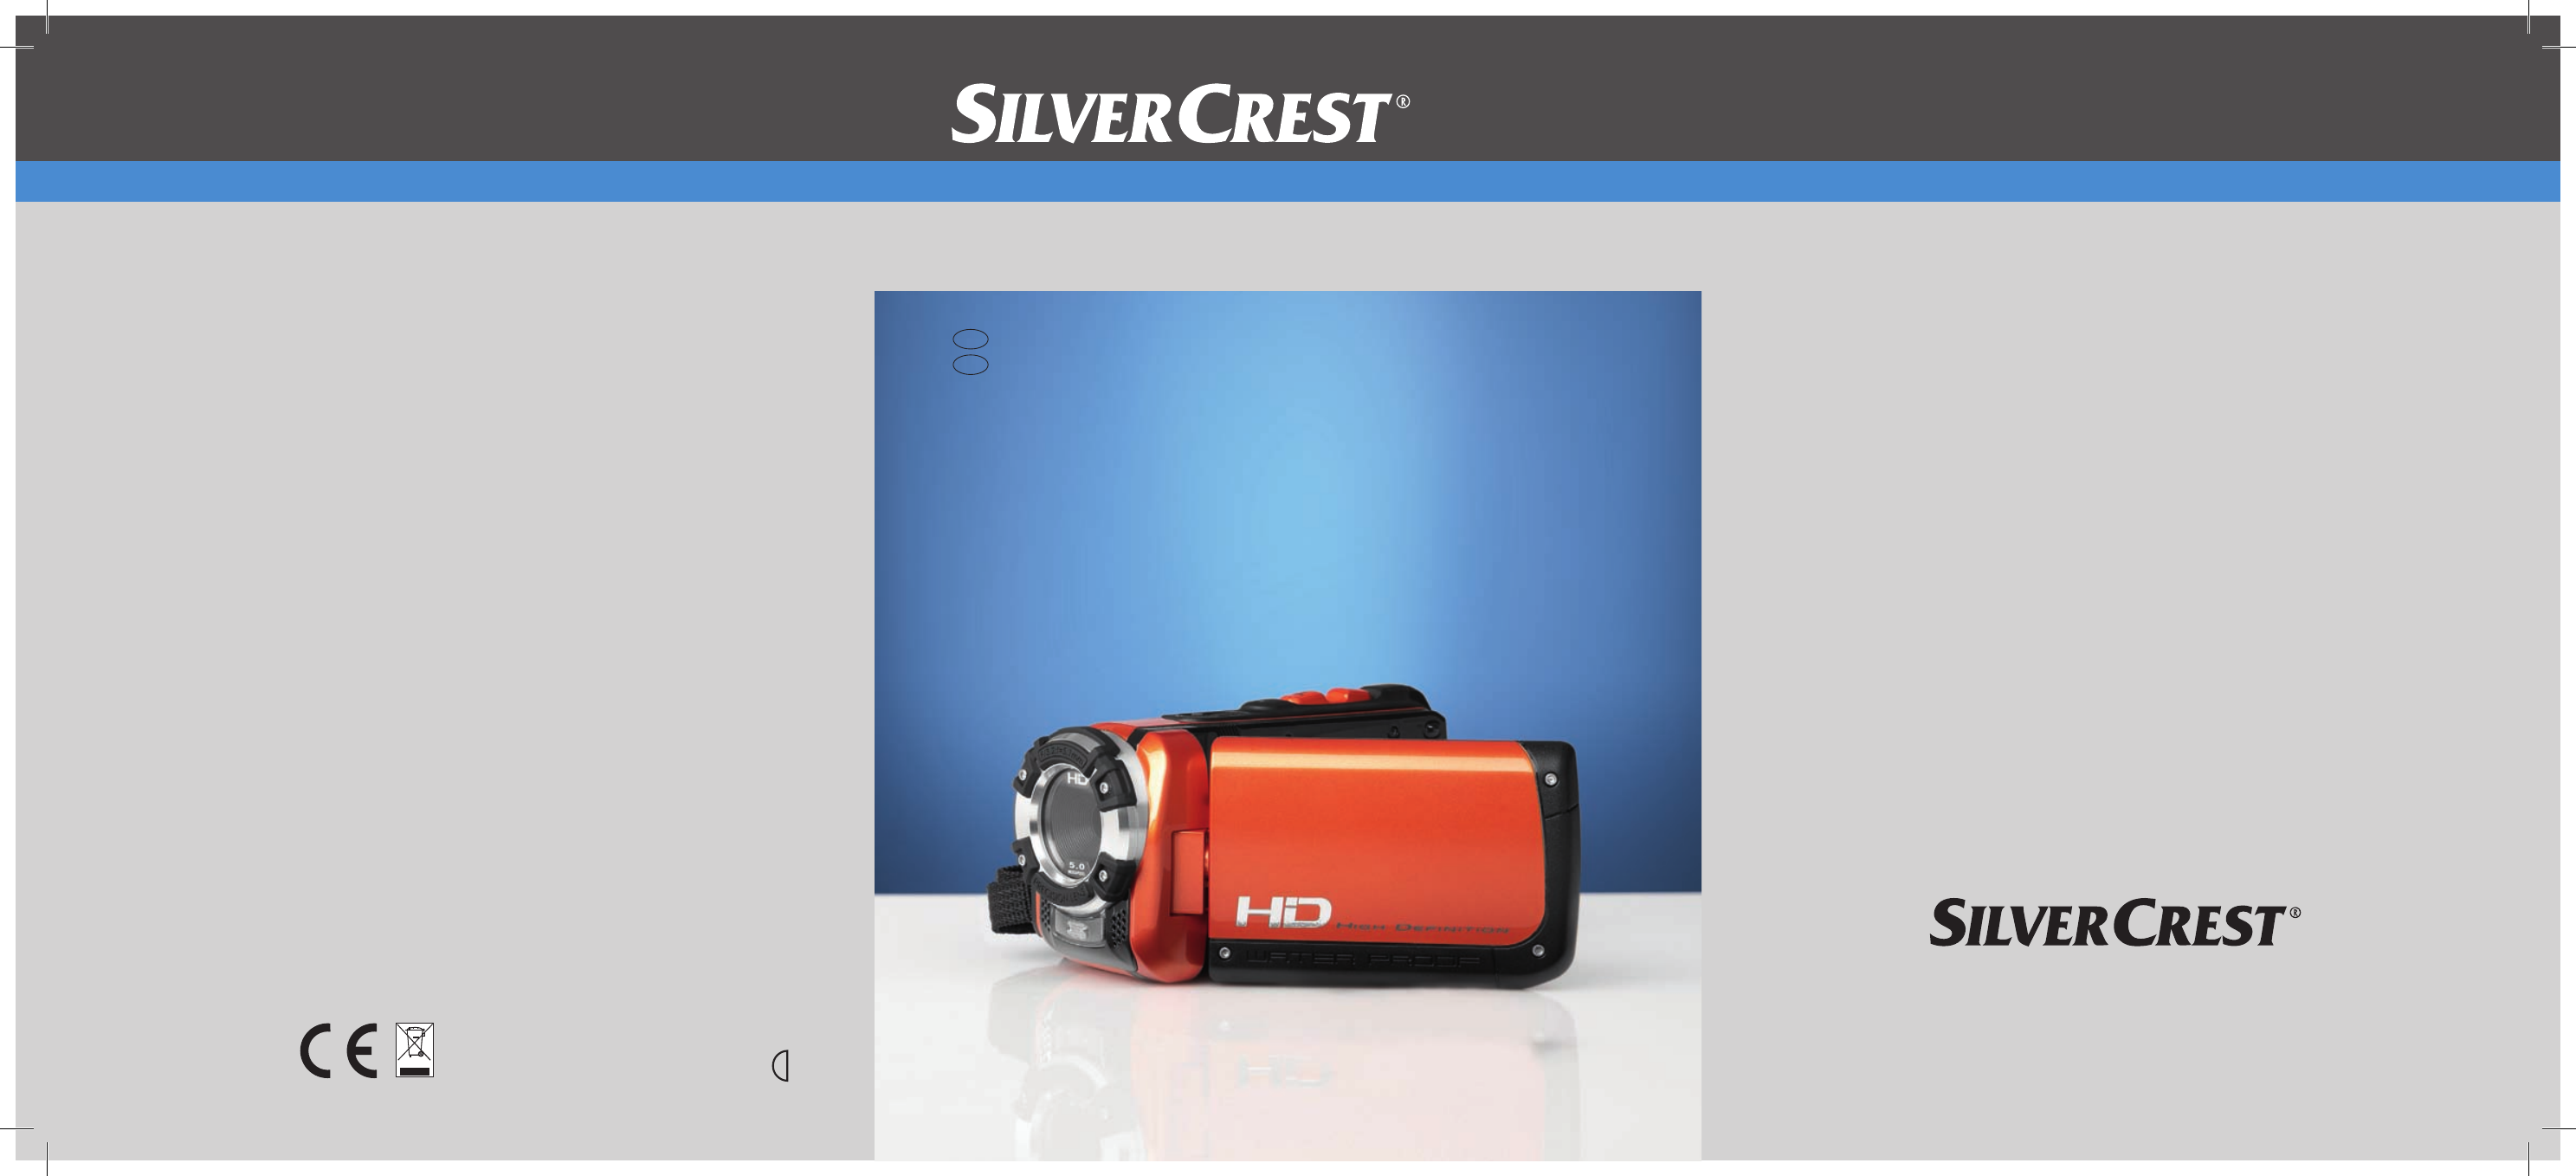 Silvercrest DV-5300HD User Manual | 58 pages